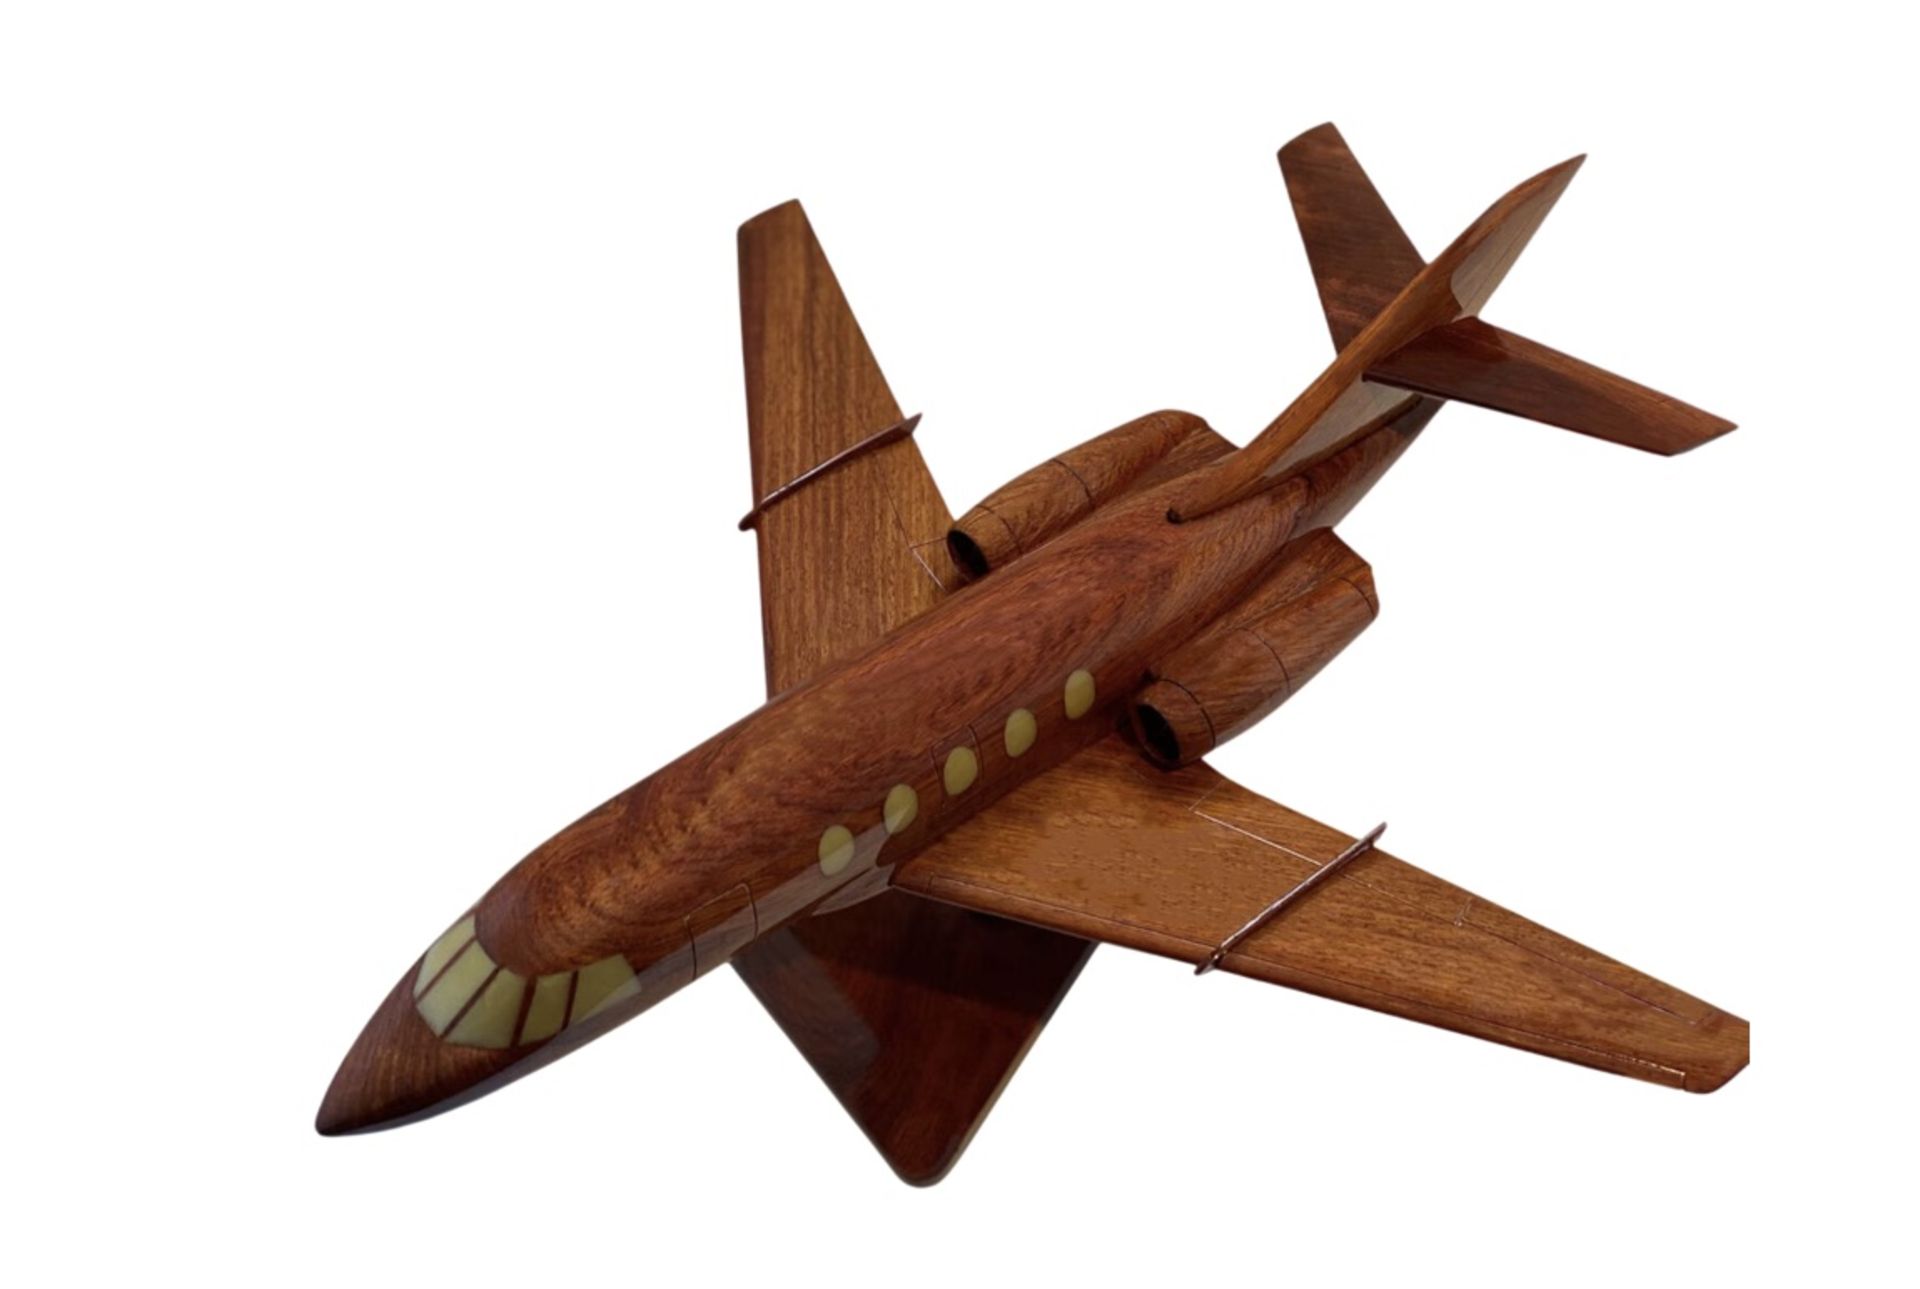 Dassault Falcon 200 Wooden Scale Aircraft Display Model - Image 2 of 6